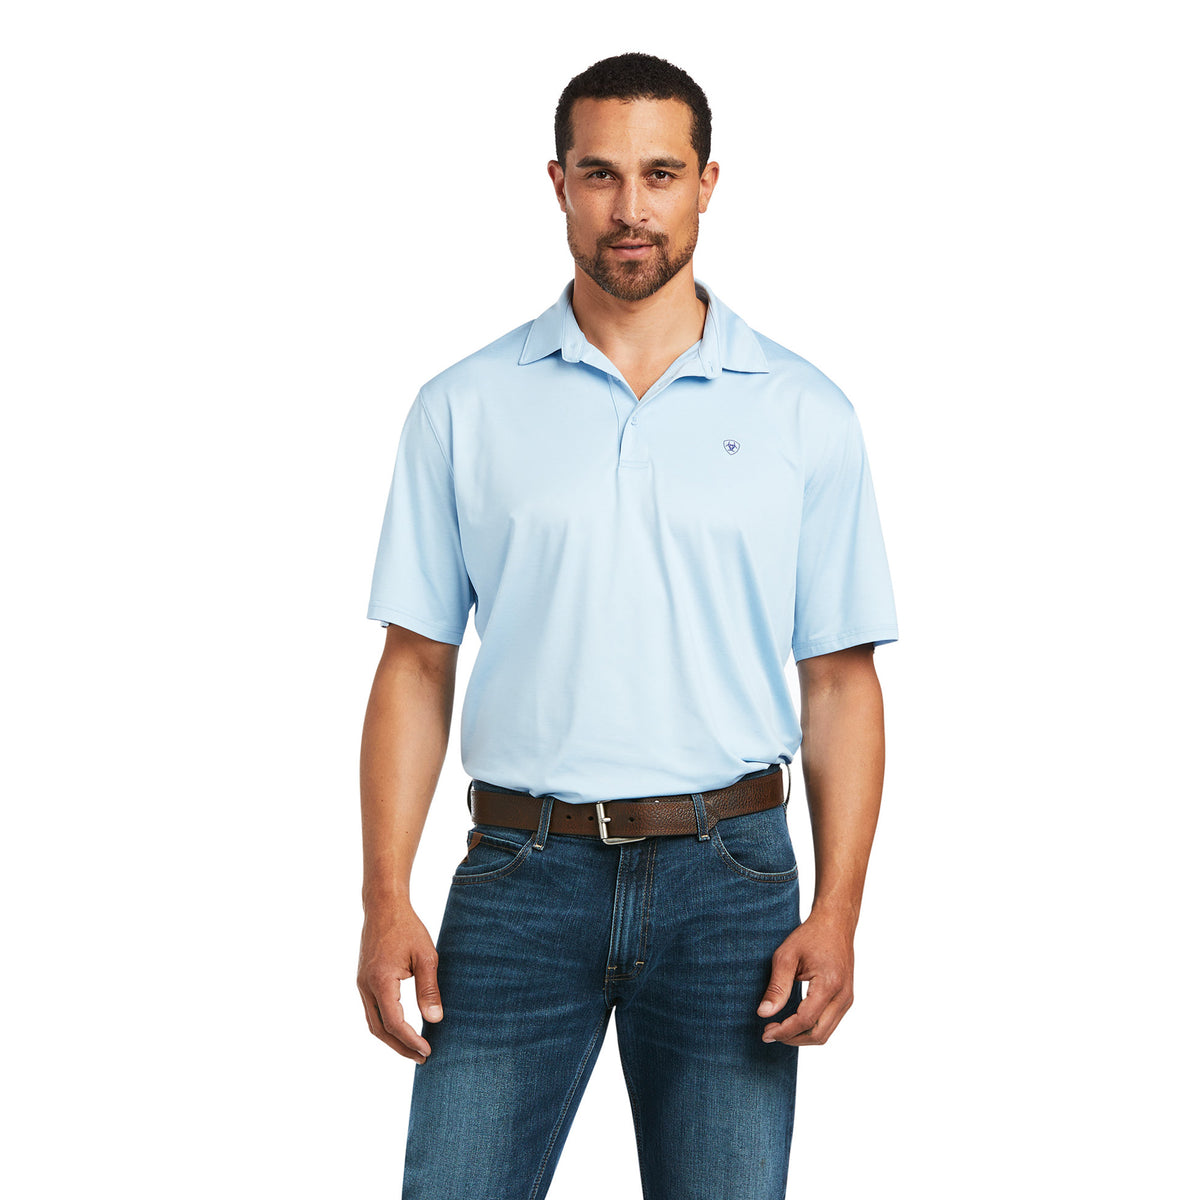 ARIAT CHARGER 2.0 FITTED POLO - POWDER BLUE